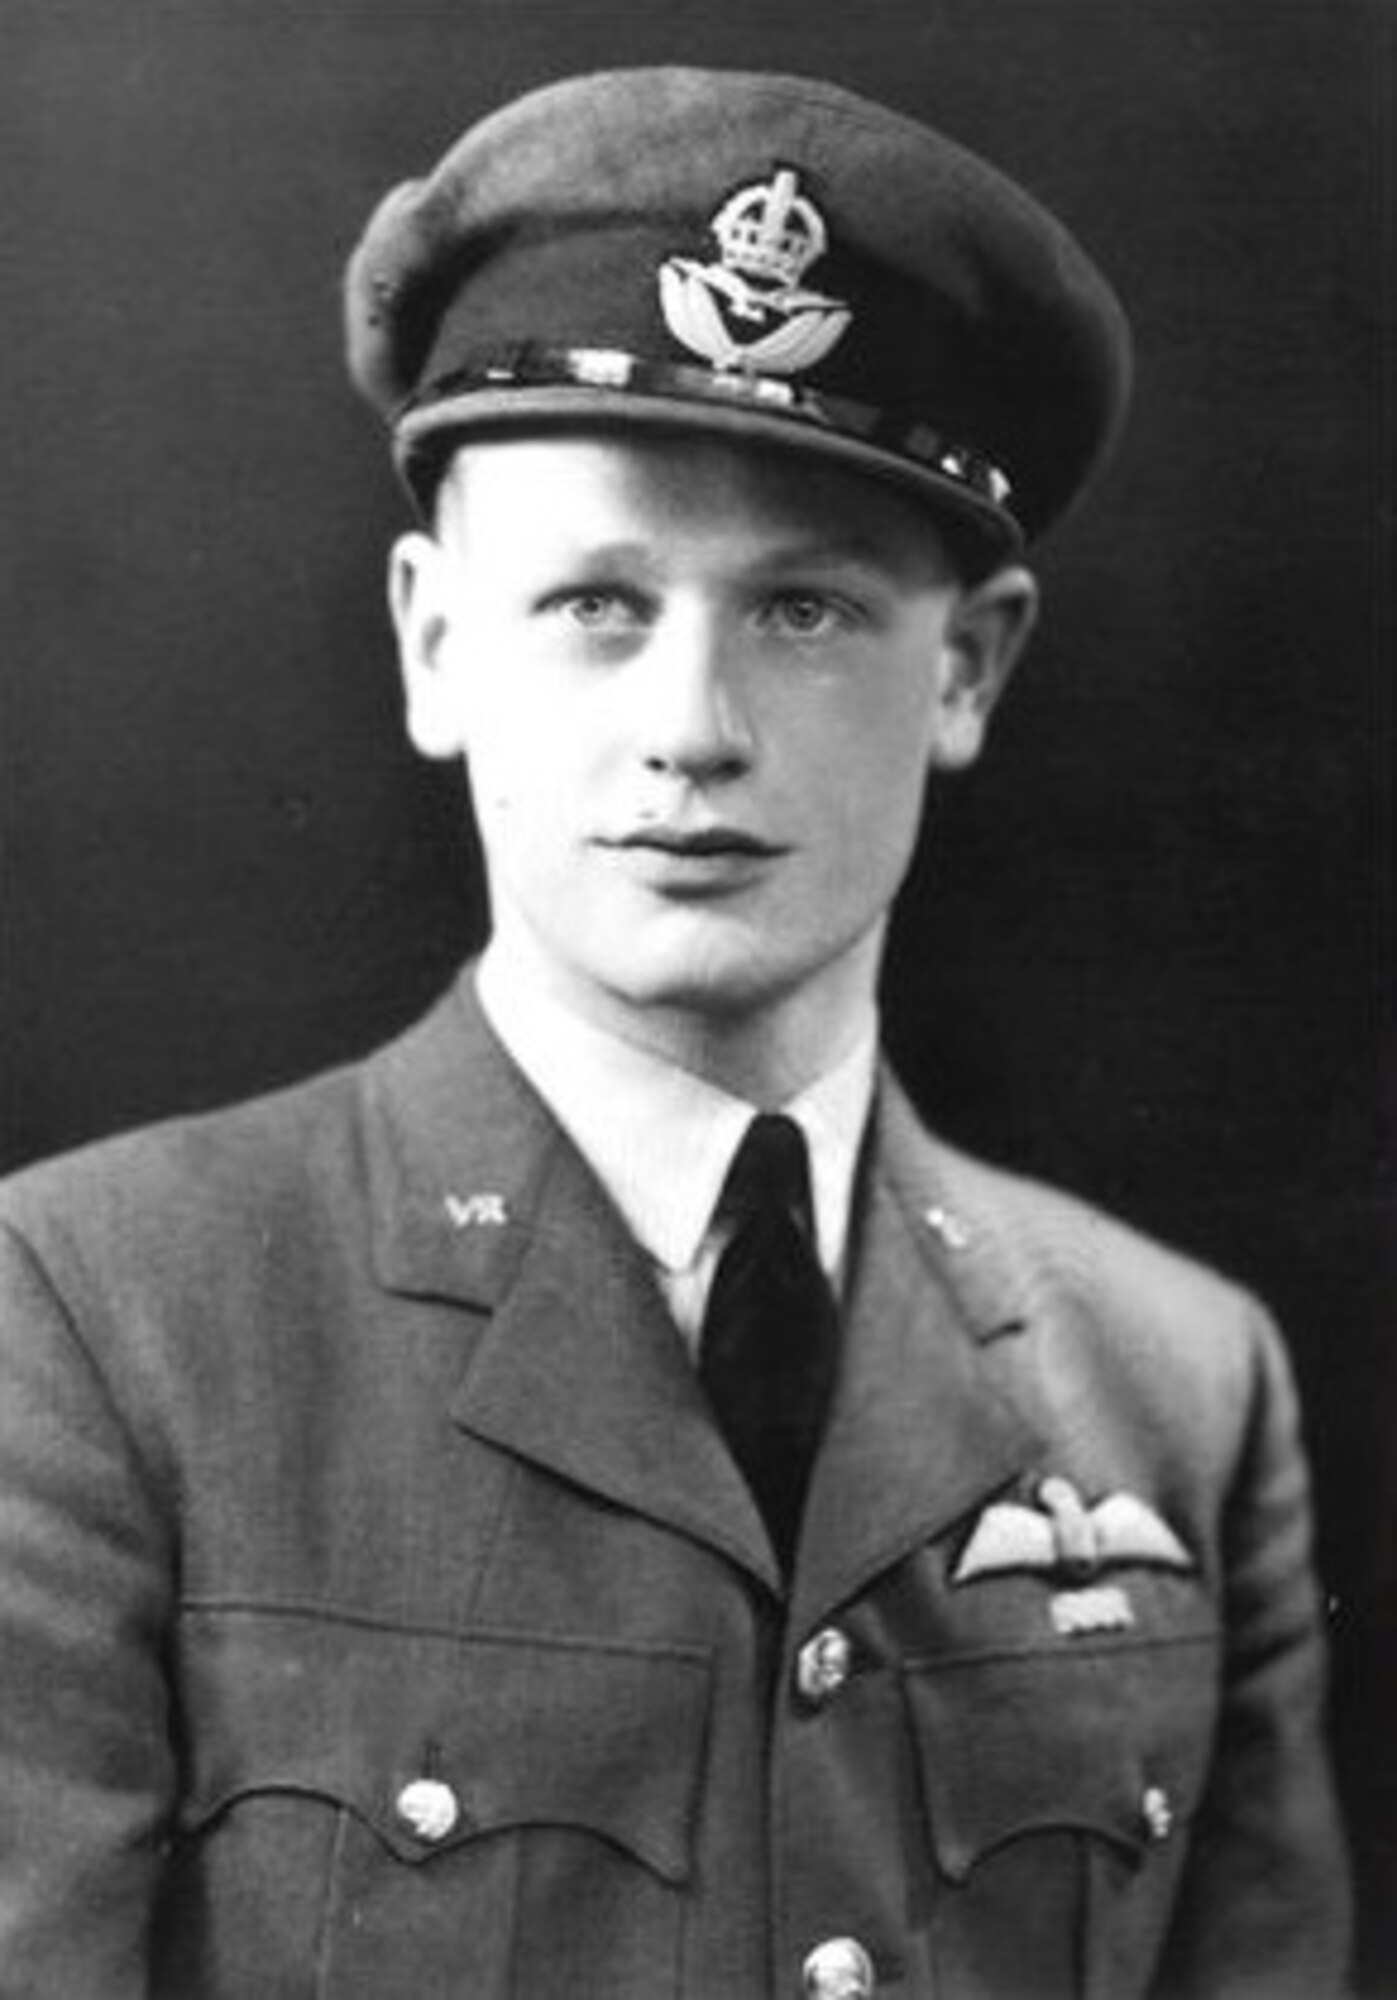 A younger Tom "Ginger" Neil in his dress uniform. (Courtesy photo)